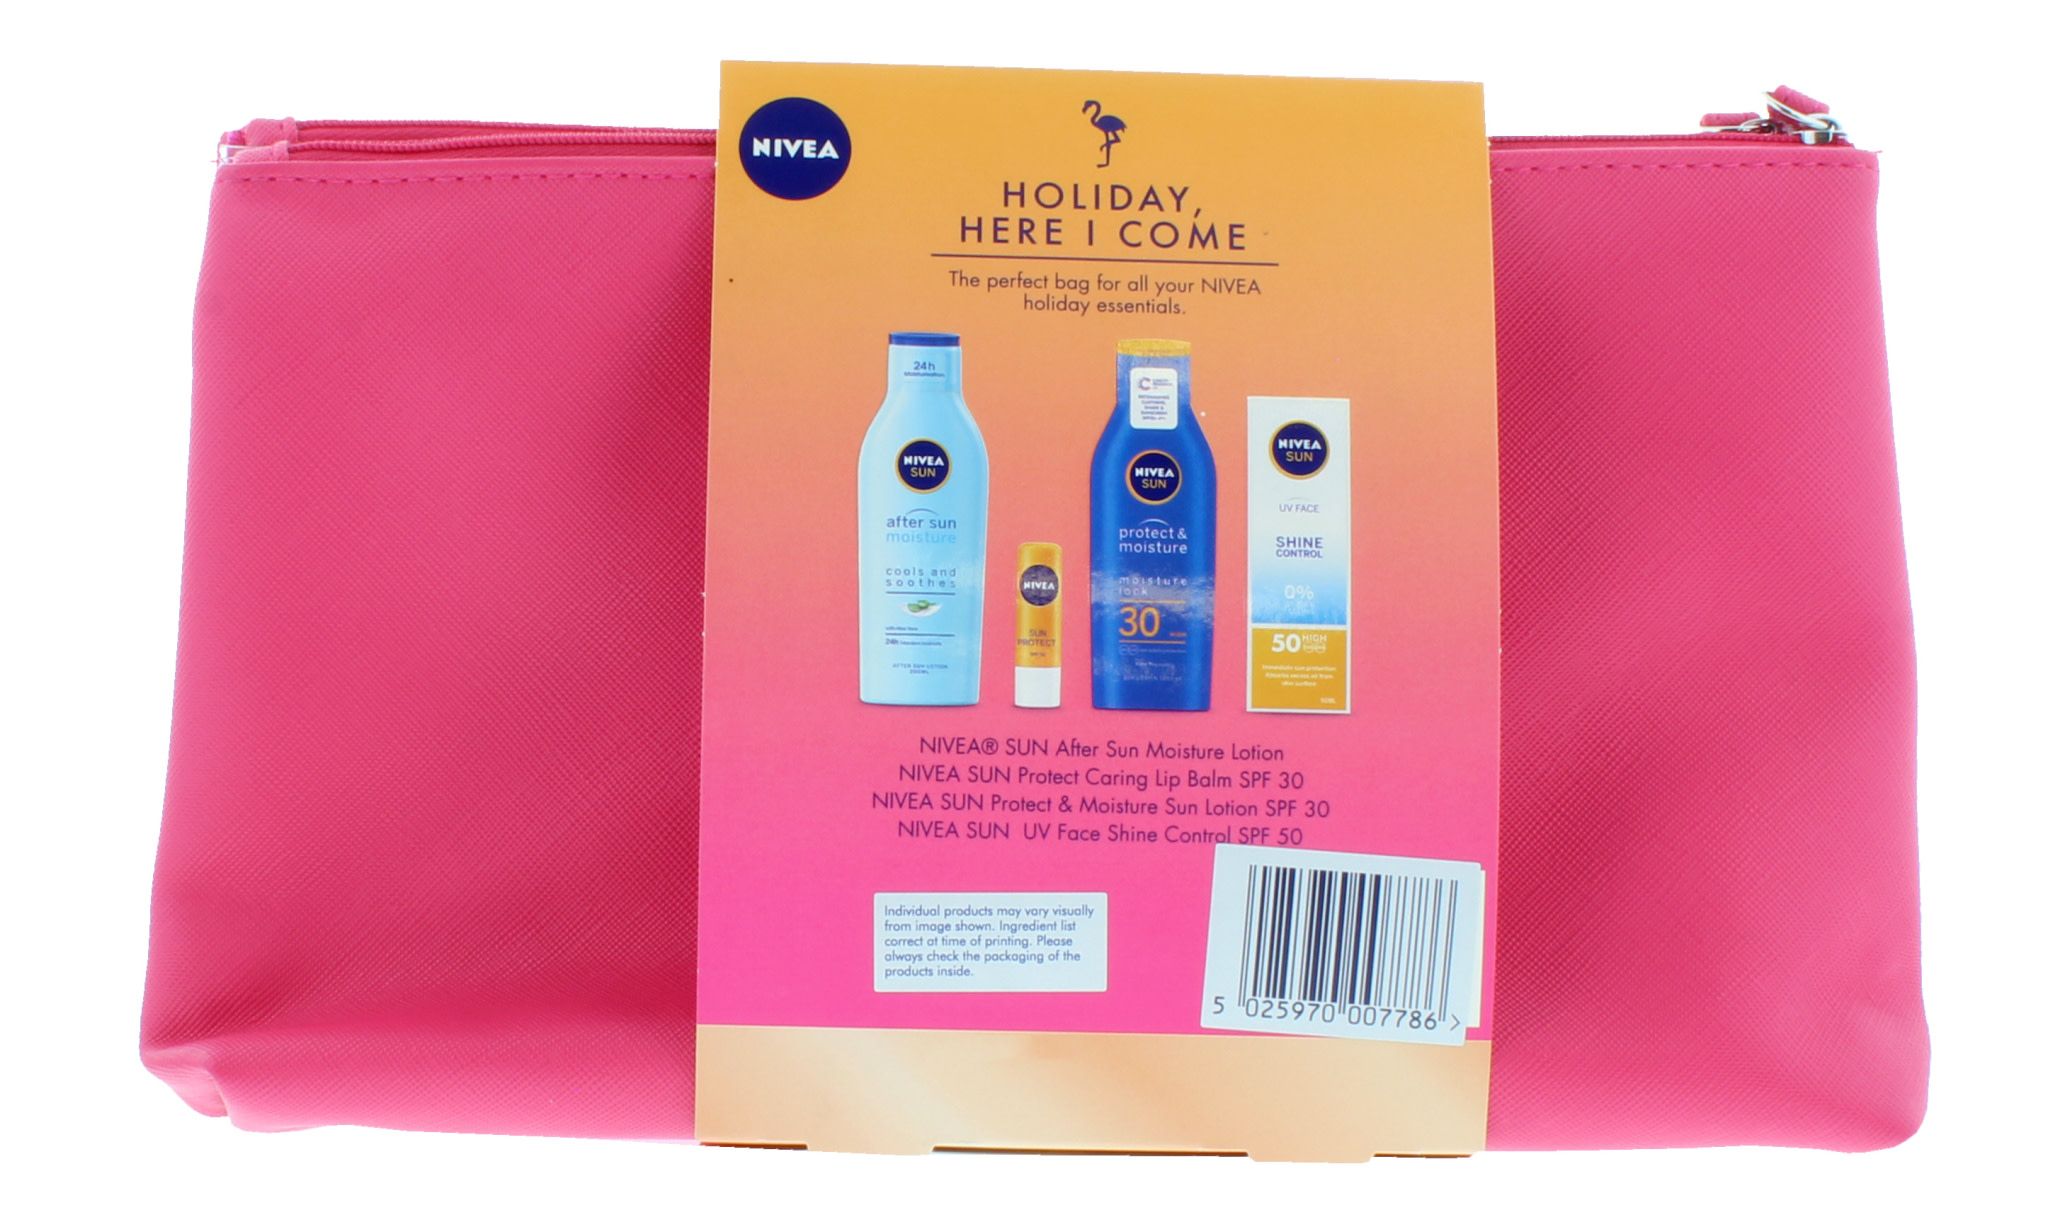 Nivea Sun Holiday Here I Come Set is the perfect bag for all your Nivea holiday essentials. This Nivea Sun set includes: Nivea Sun After Sun Moisture Lotion 200ml + Nivea Sun Protect Caring Lip Balm SPF30 4.8g + Nivea Sun Protect & Moisture Sun Lotion SPF30 200ml + Nivea Sun UV Face Shine Control SPF50 50ml + Pink Toiletry Bag with two handy pockets inside. This is a pack of 3 gift sets.